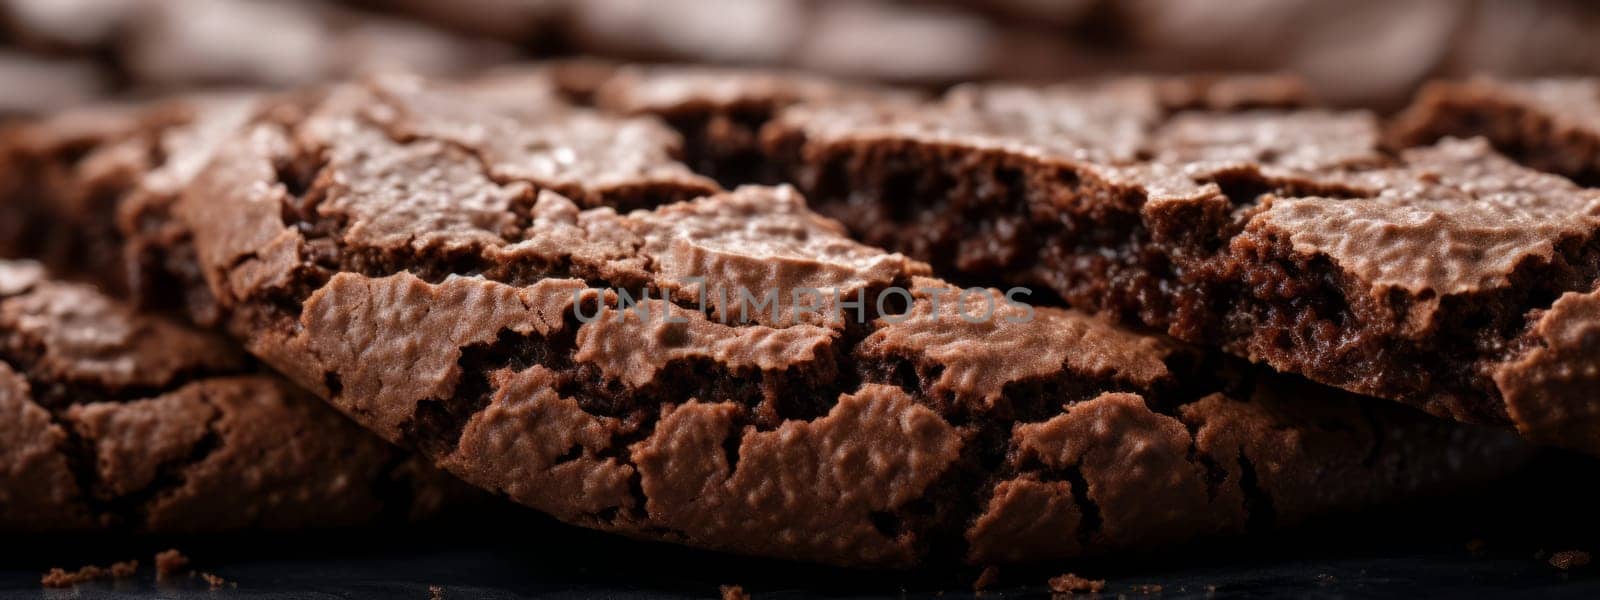 A close up of a pile of chocolate chips cookies texture background